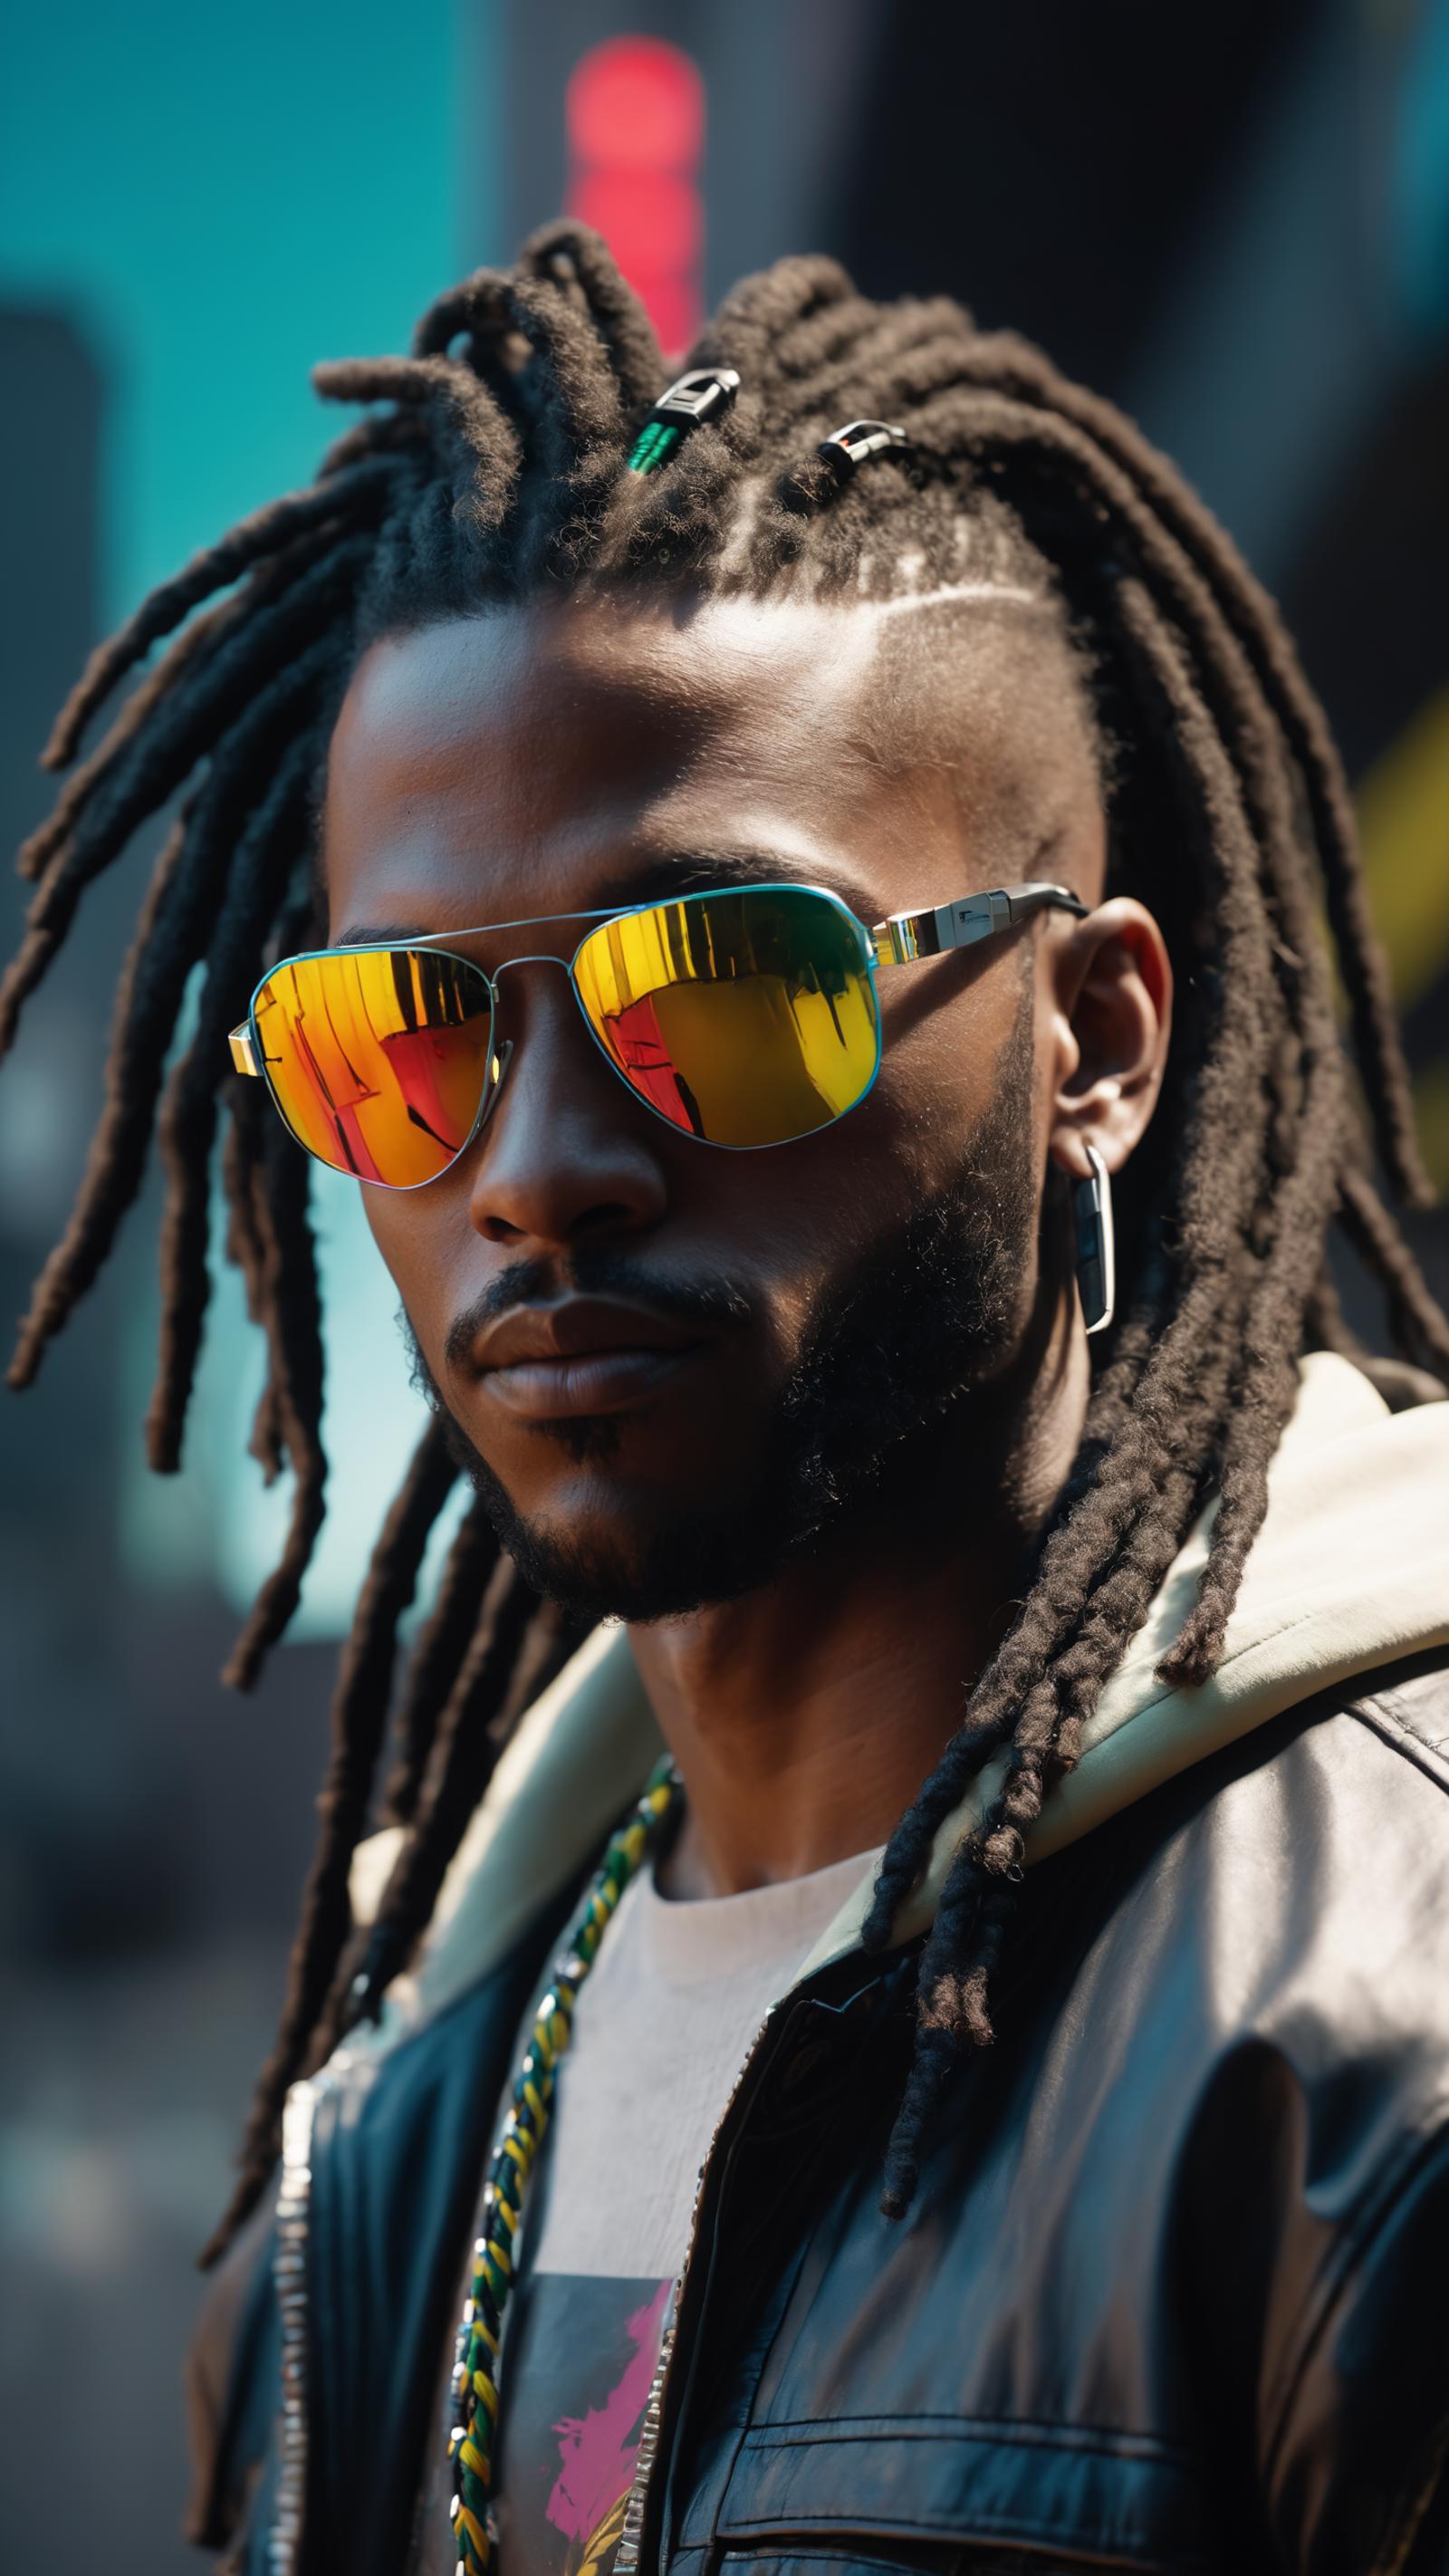 Man with dreadlocks wearing sunglasses and a white shirt.